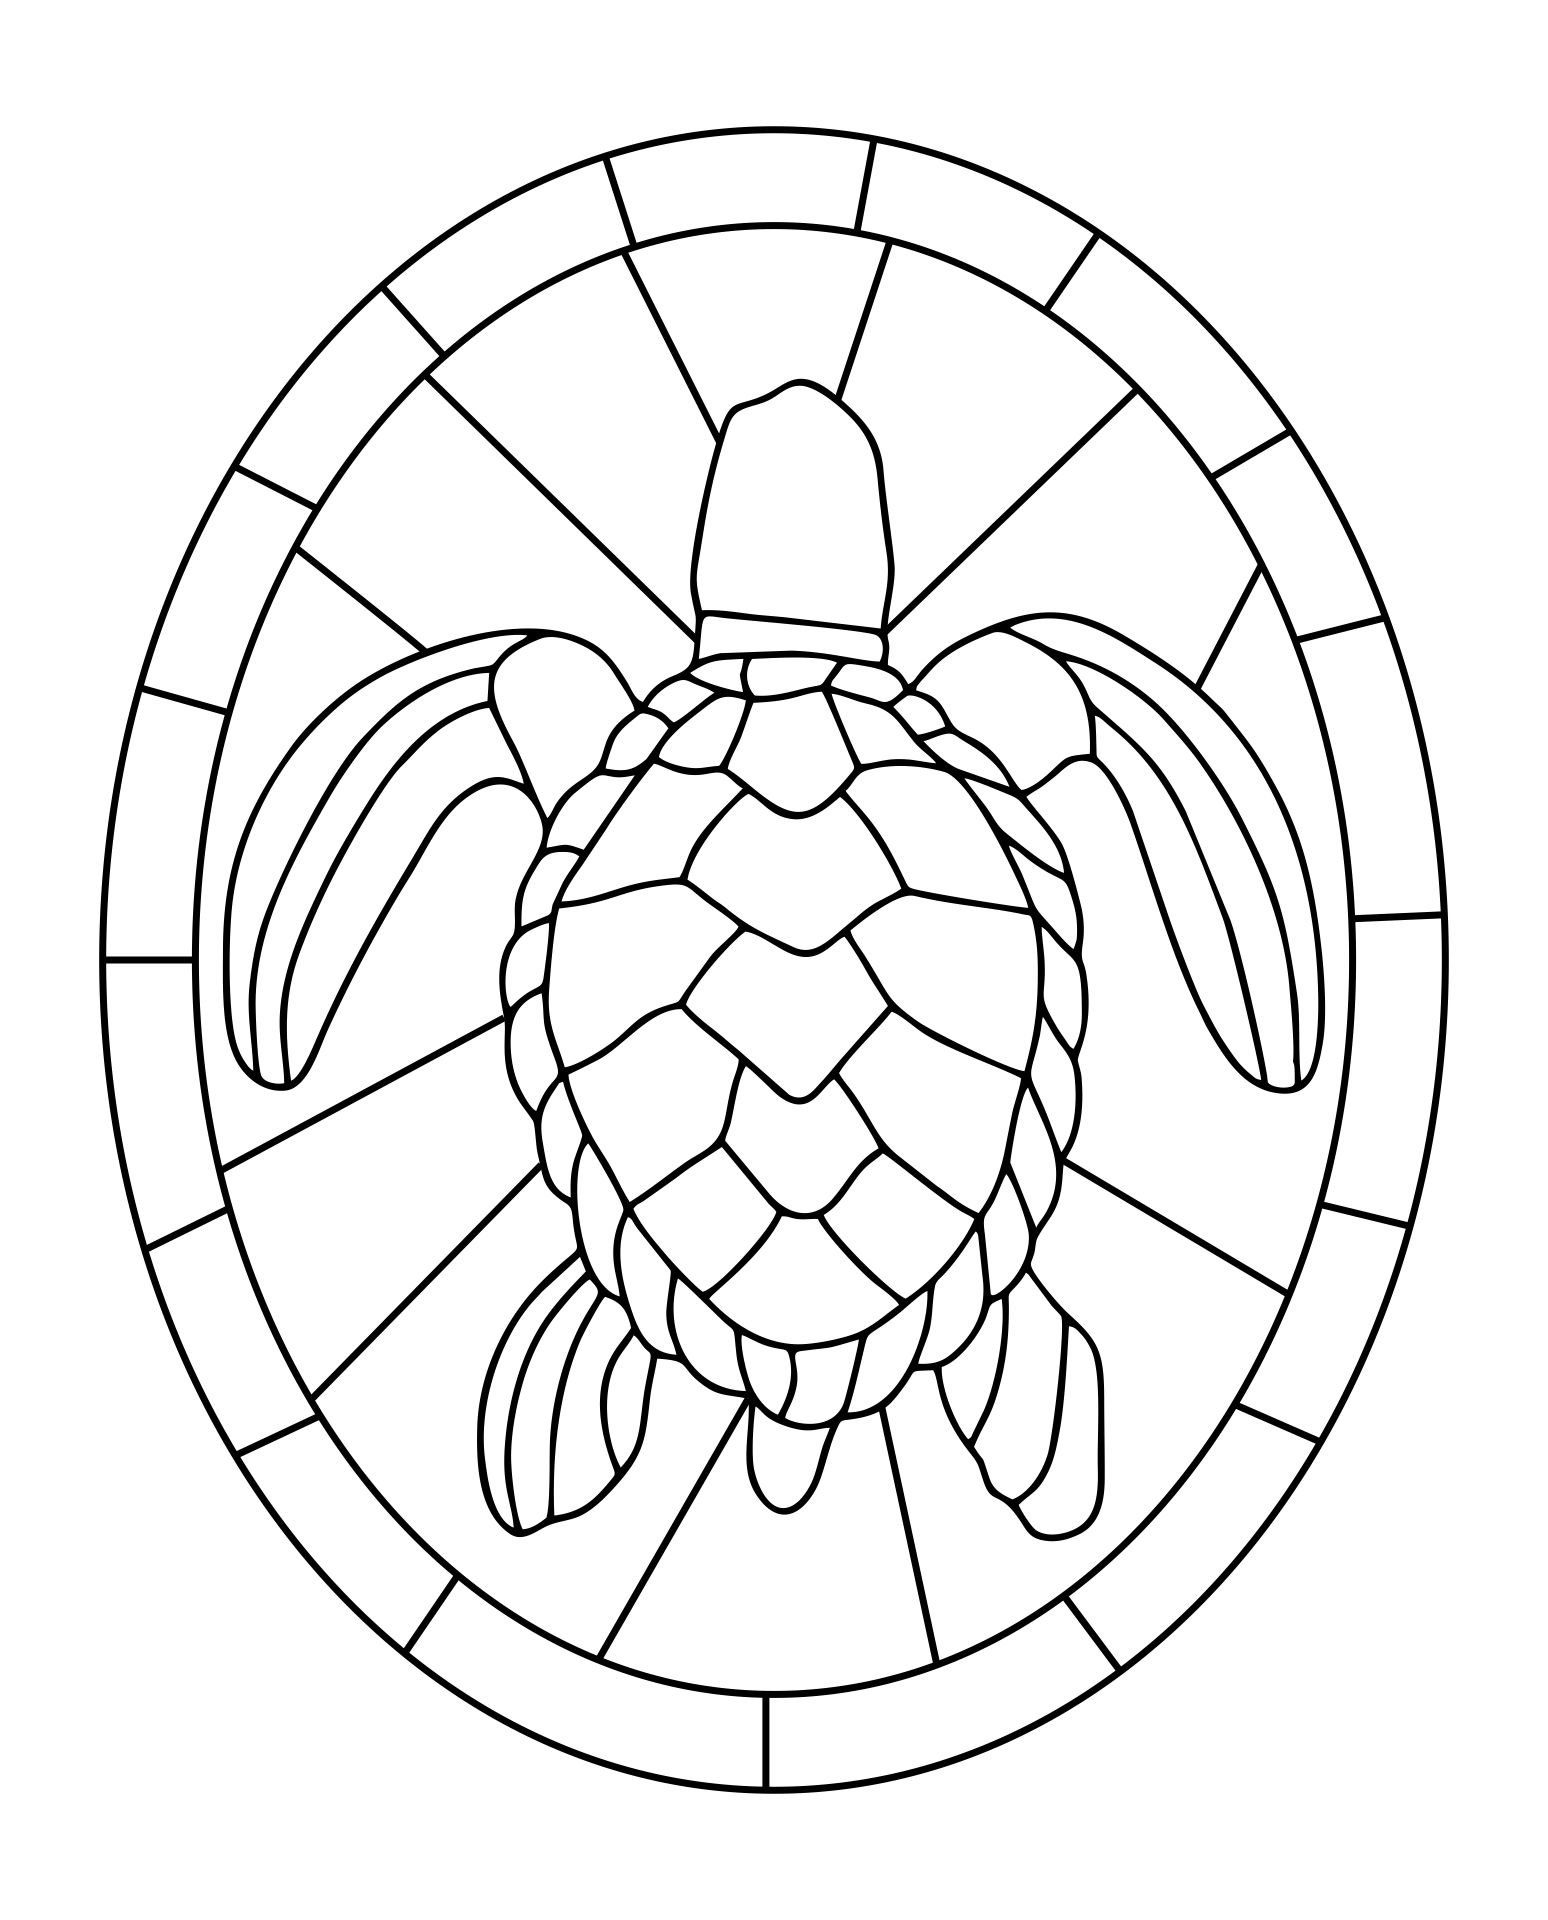 Turtle Stained Glass Patterns